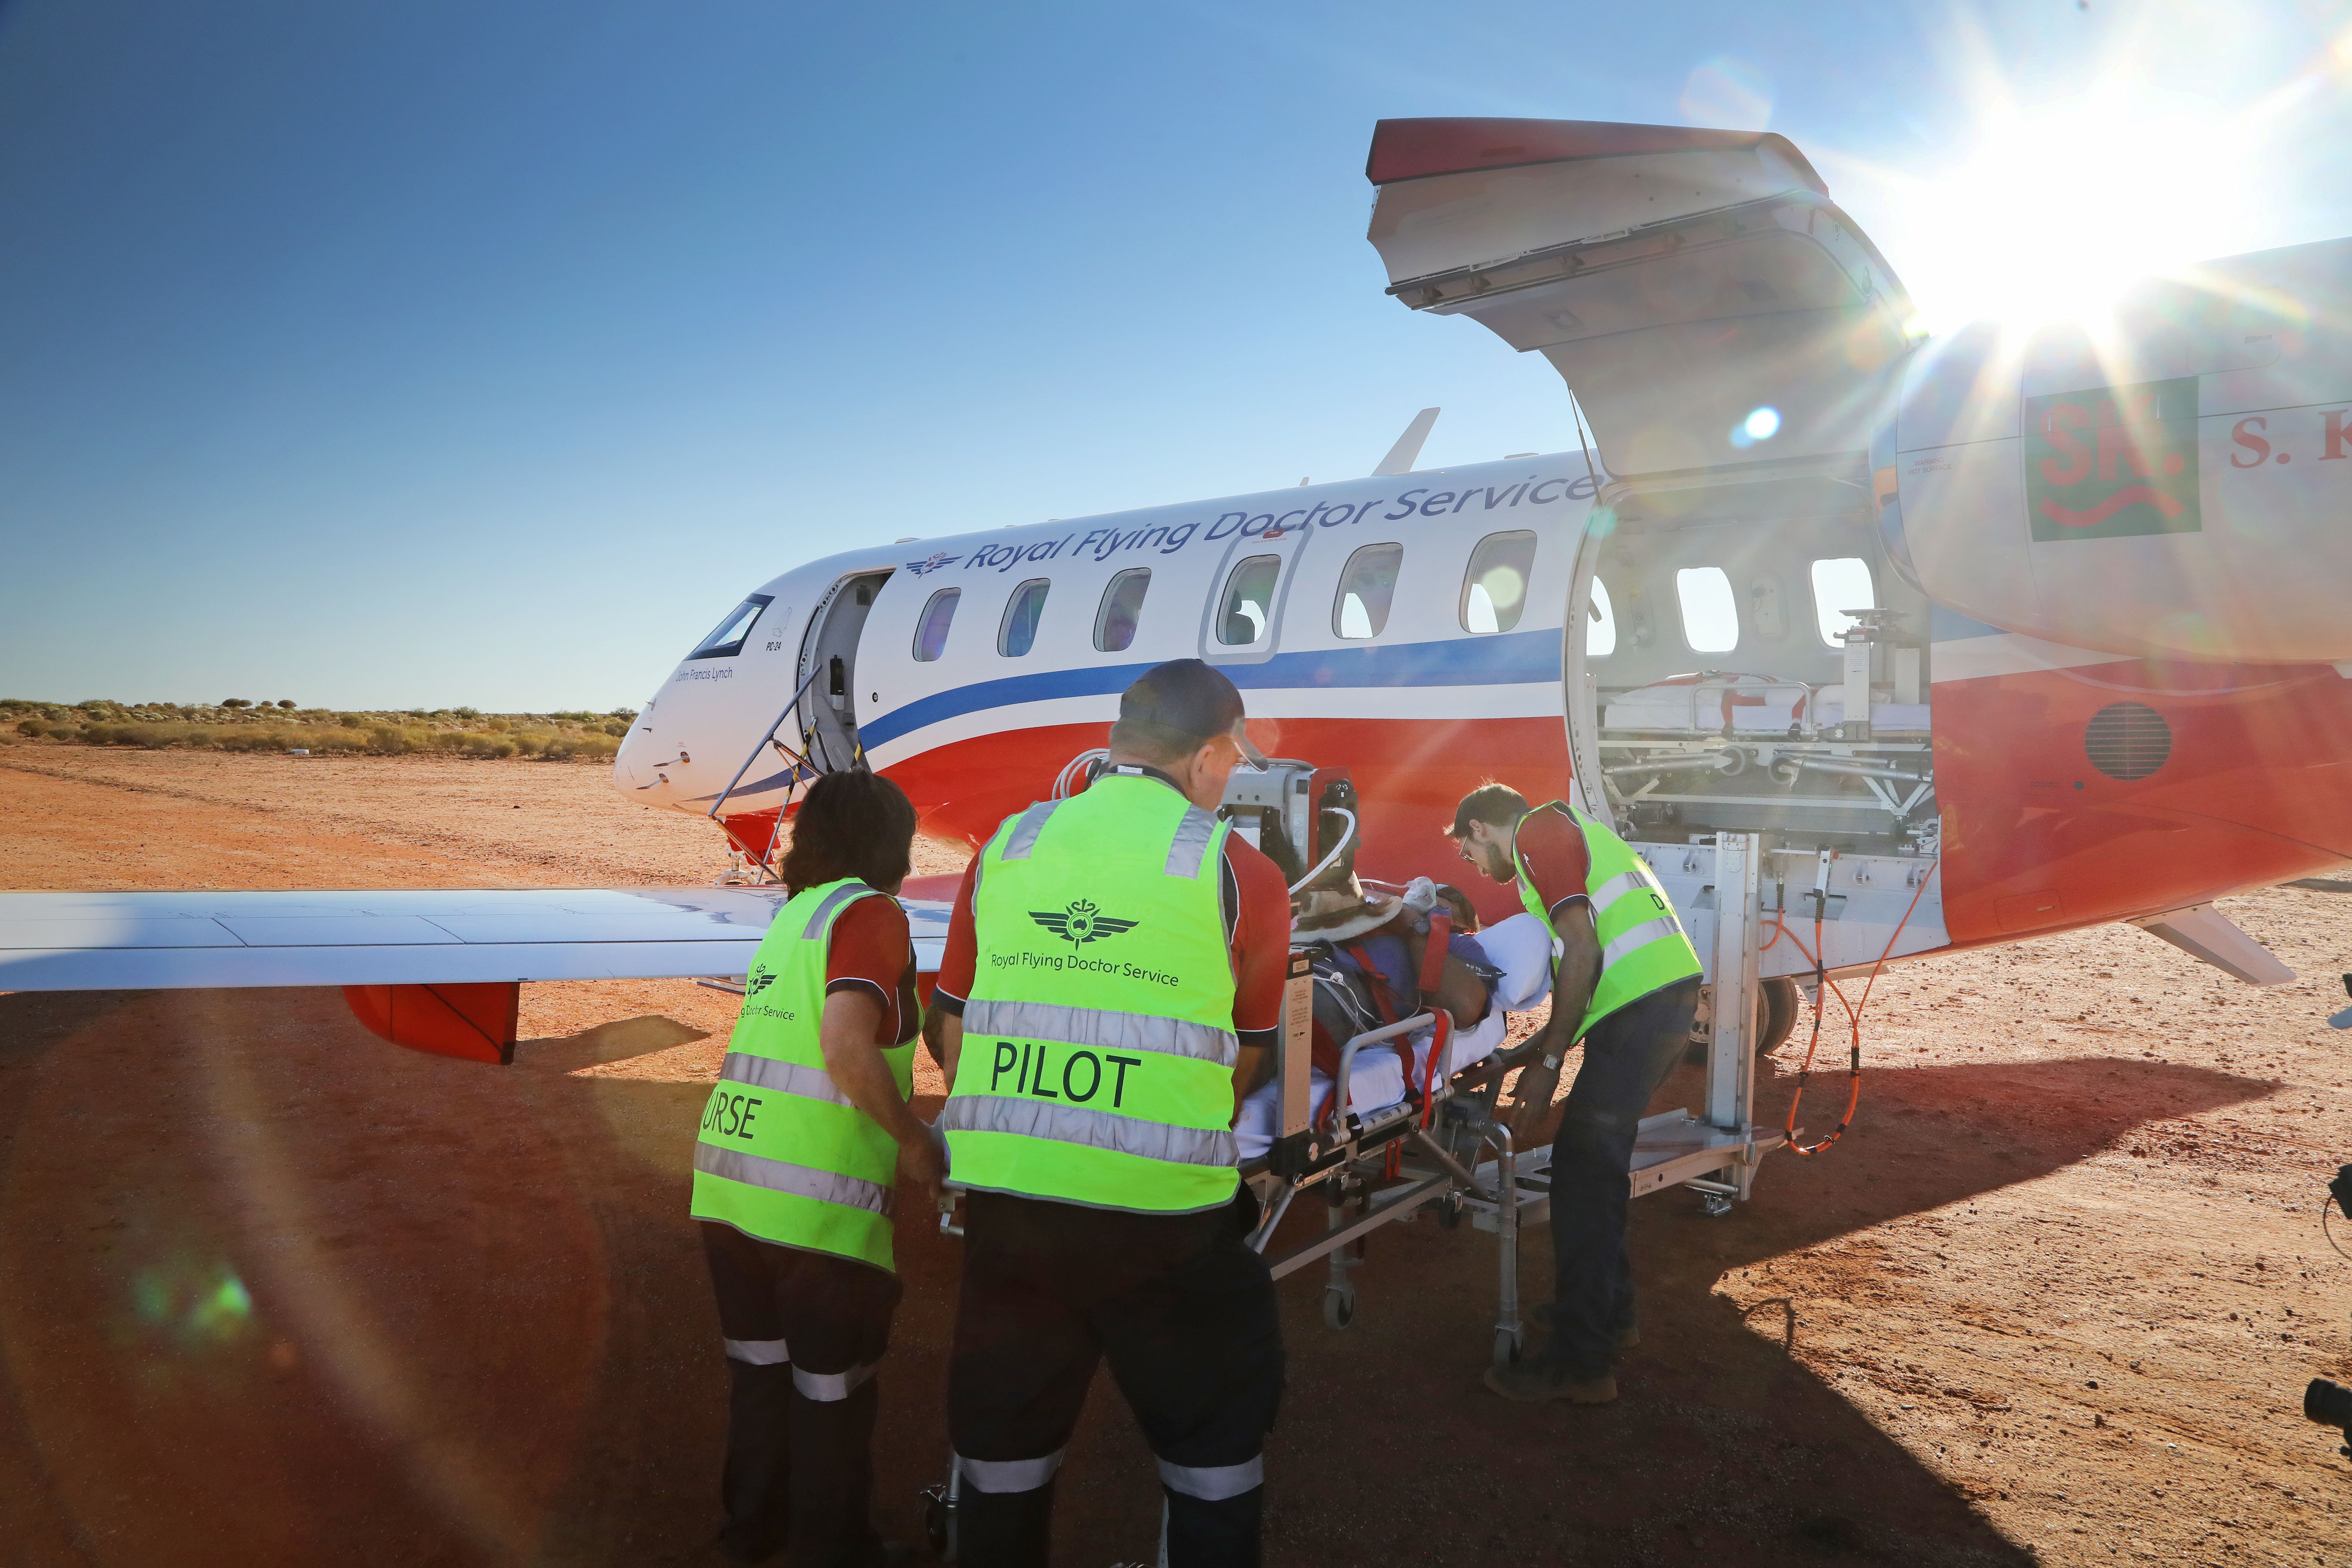 A nurse, doctor, and pilot help a sick patient on a stretcher board a Royal Flying Doctor Medevac aircraft.